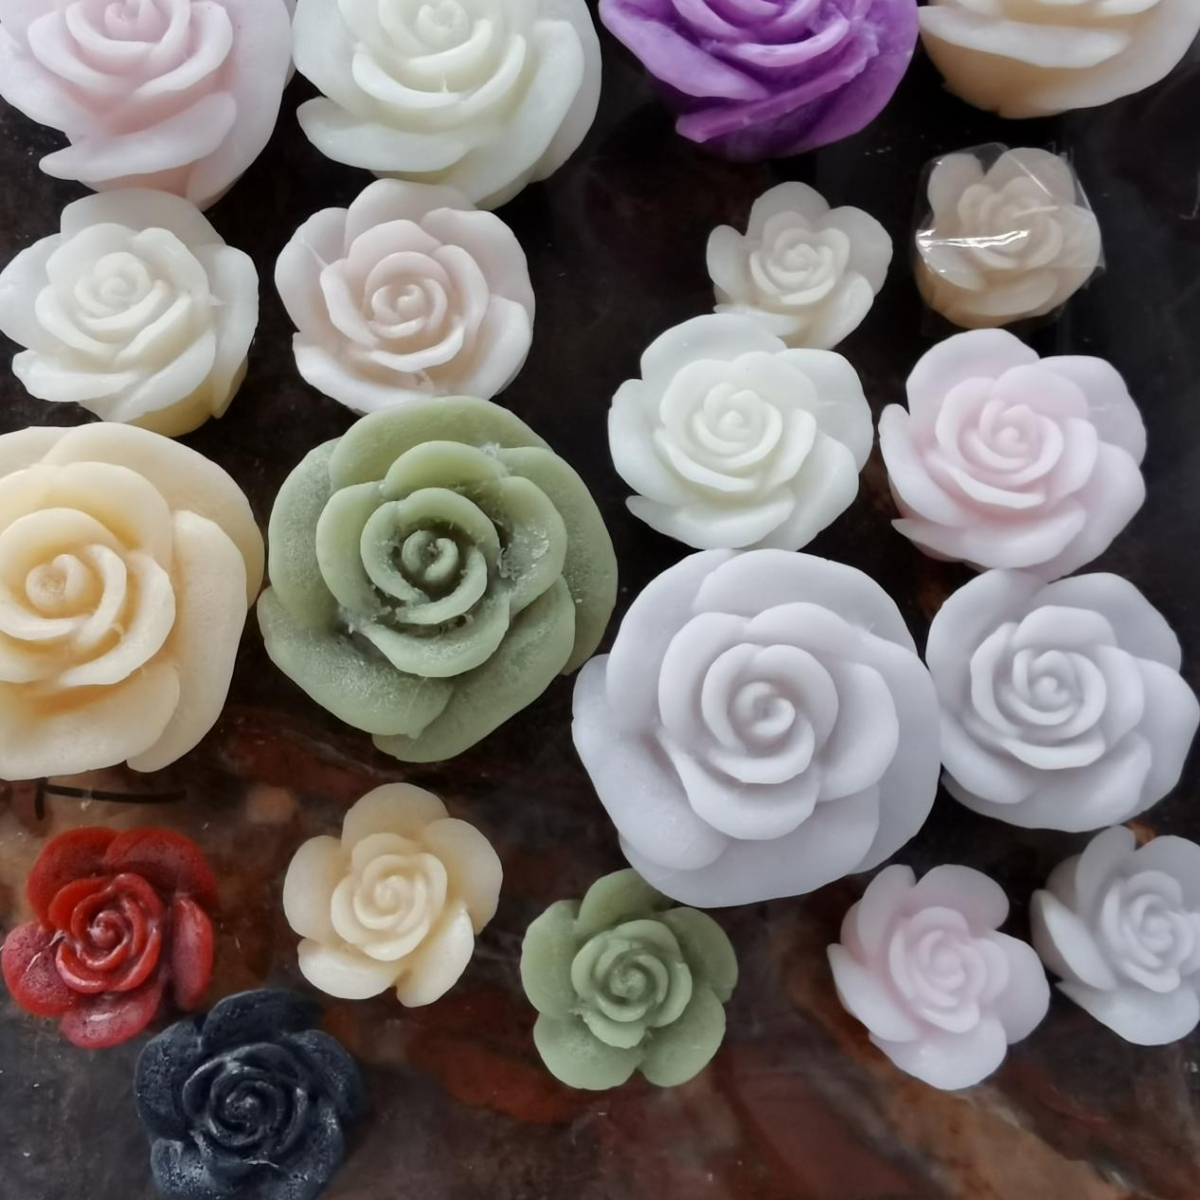 Scented Candles -Rose Shaped Flower Candles ,Beeswax Candles ,China Factory ,Price-HOWCANDLE-Candles,Scented Candles,Aromatherapy Candles,Soy Candles,Vegan Candles,Jar Candles,Pillar Candles,Candle Gift Sets,Essential Oils,Reed Diffuser,Candle Holder,